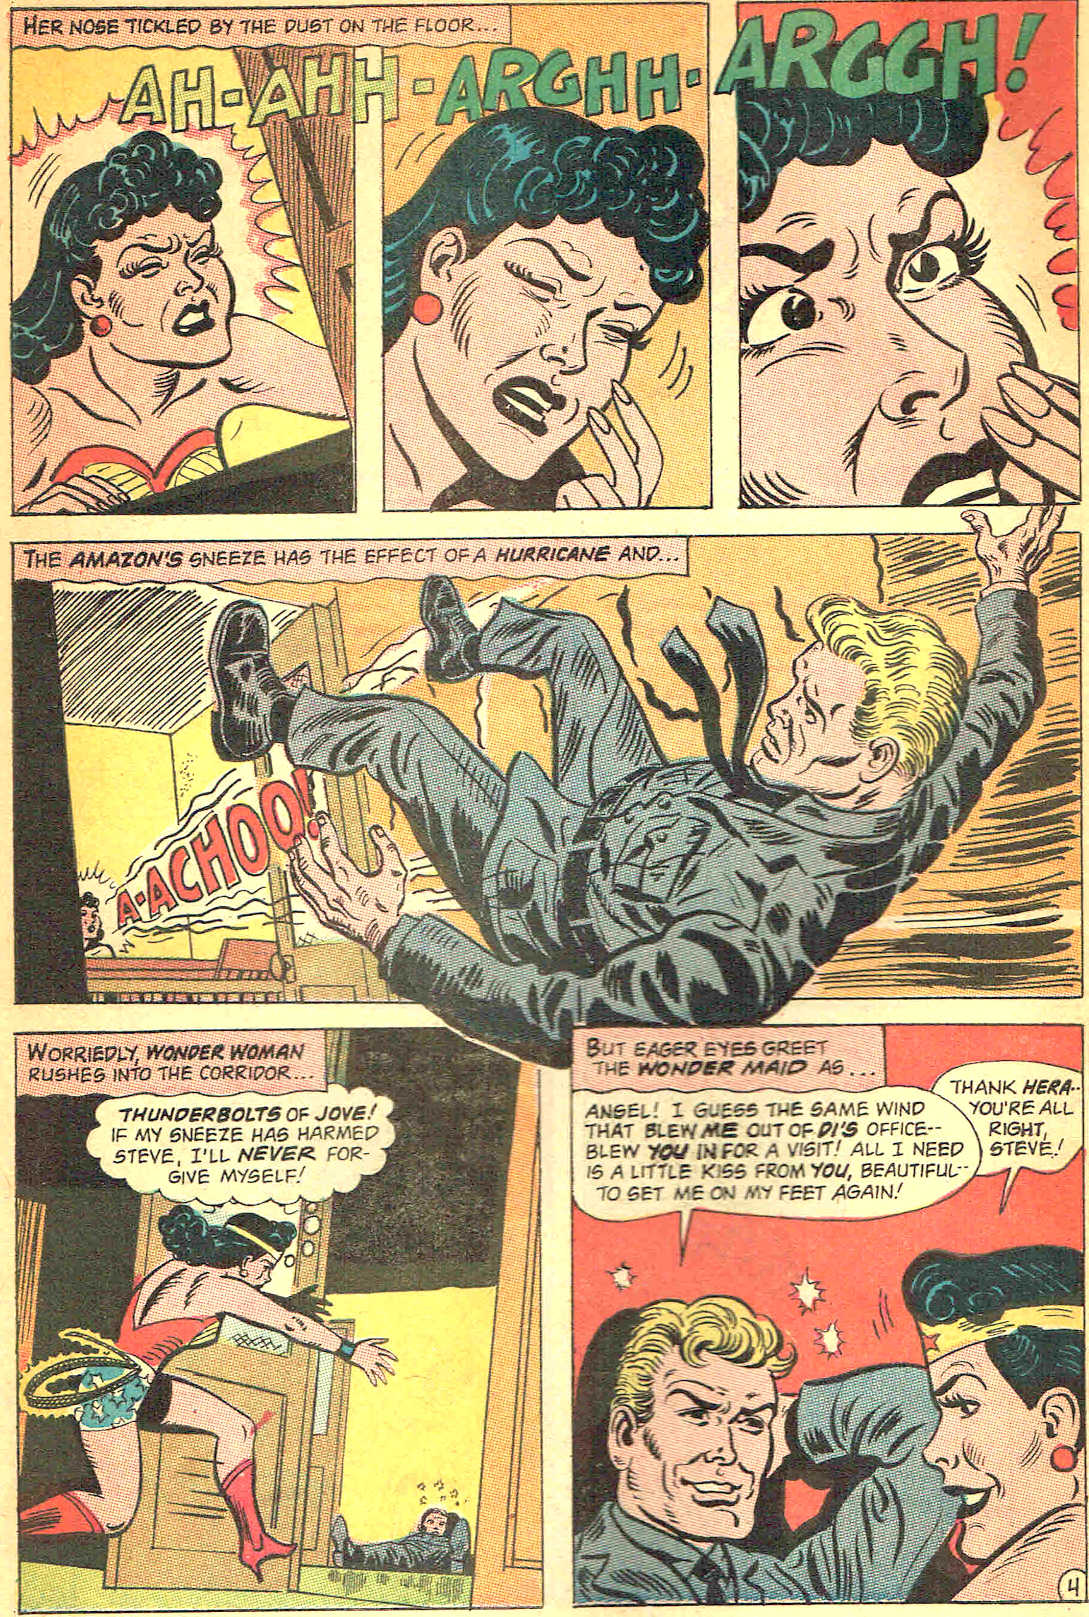 Wonder Woman sneezes blowing Steve Trevor out of her office